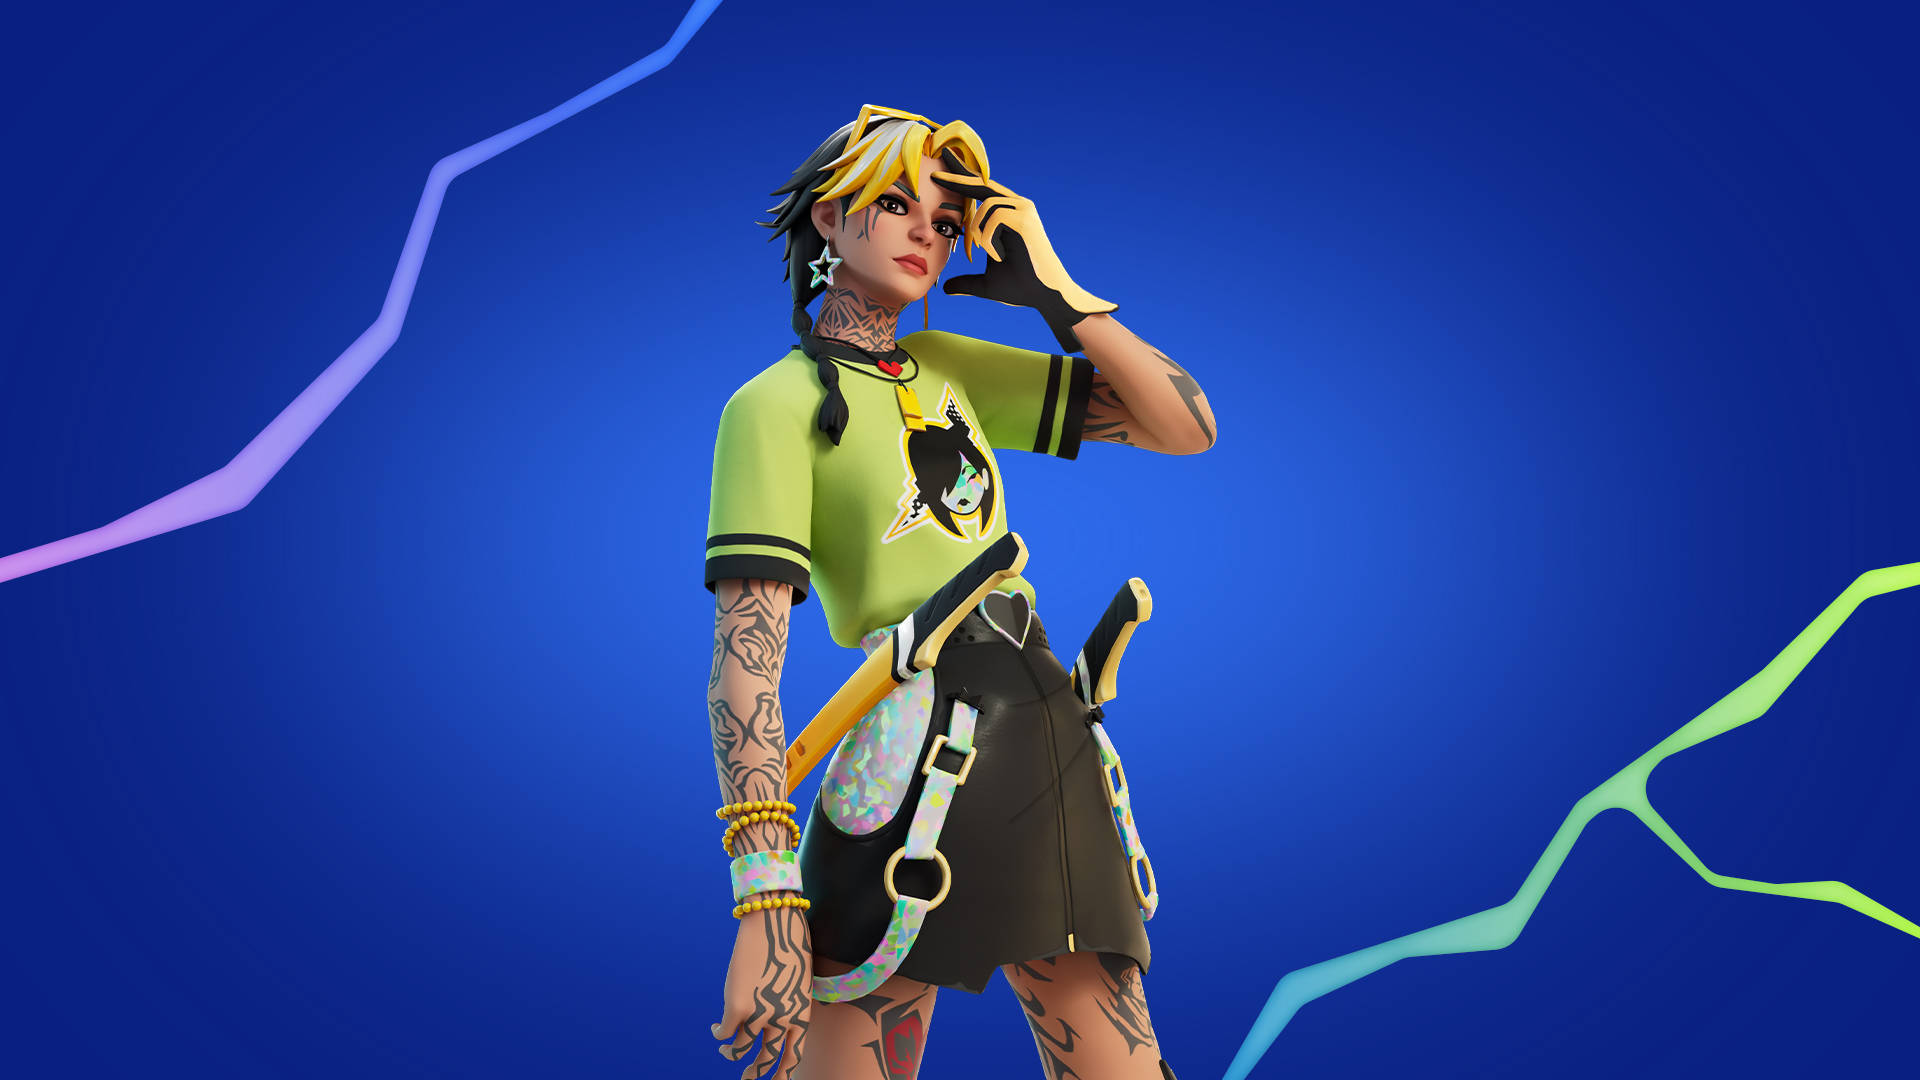 Strike fear into opponents with this fierce female Fortnite character. Wallpaper